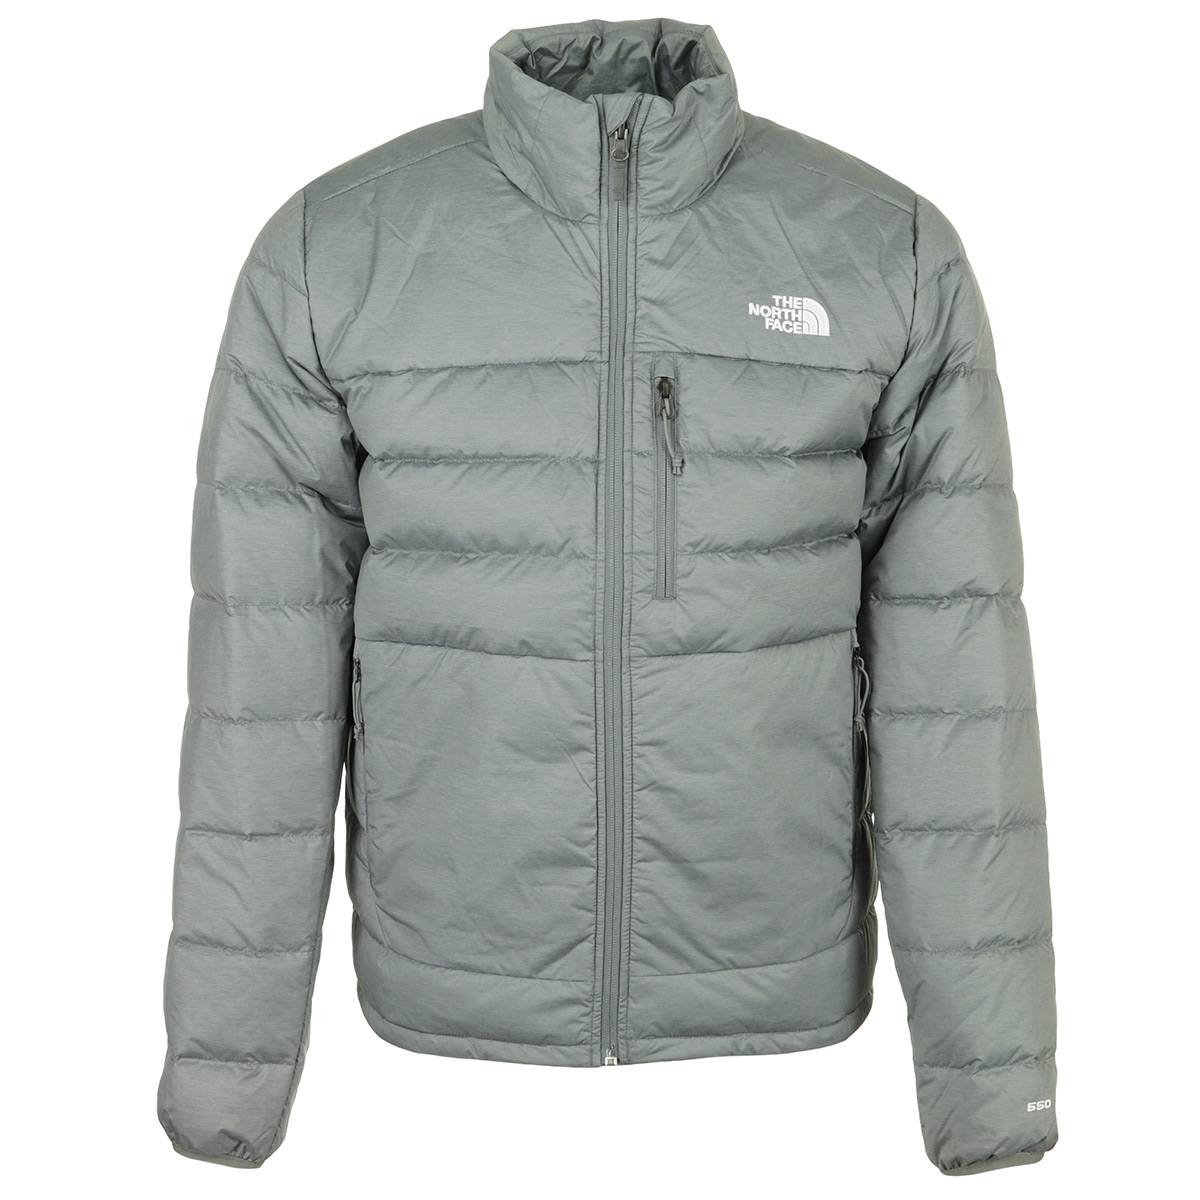 The North Face "Aconcagua 2 Jacket"